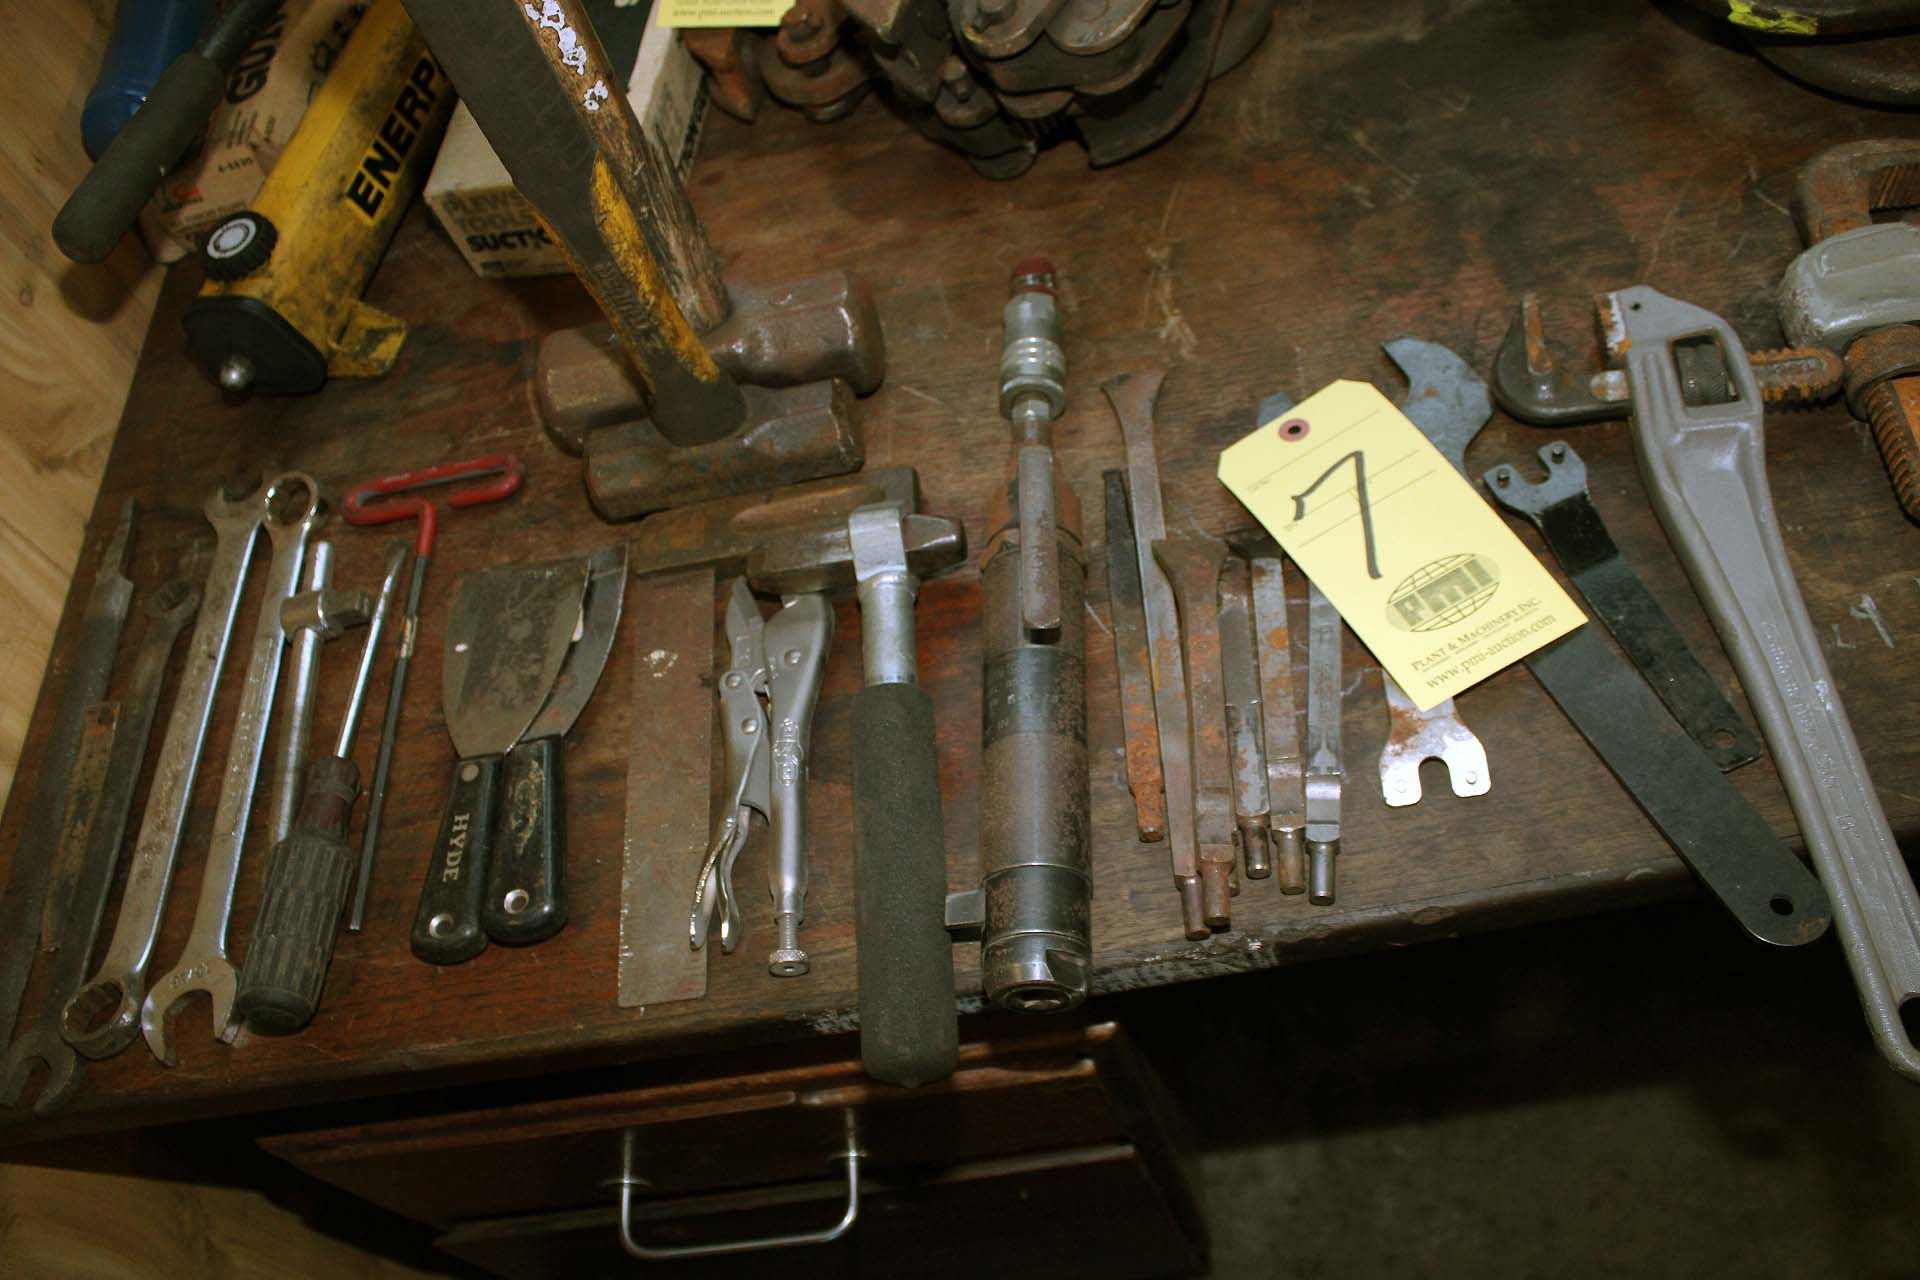 LOT CONSISTING OF: (4) pipe wrenches, (2) C-clamps, (1) chisel scaler w/chisels, hammers, wrenches & - Bild 4 aus 4